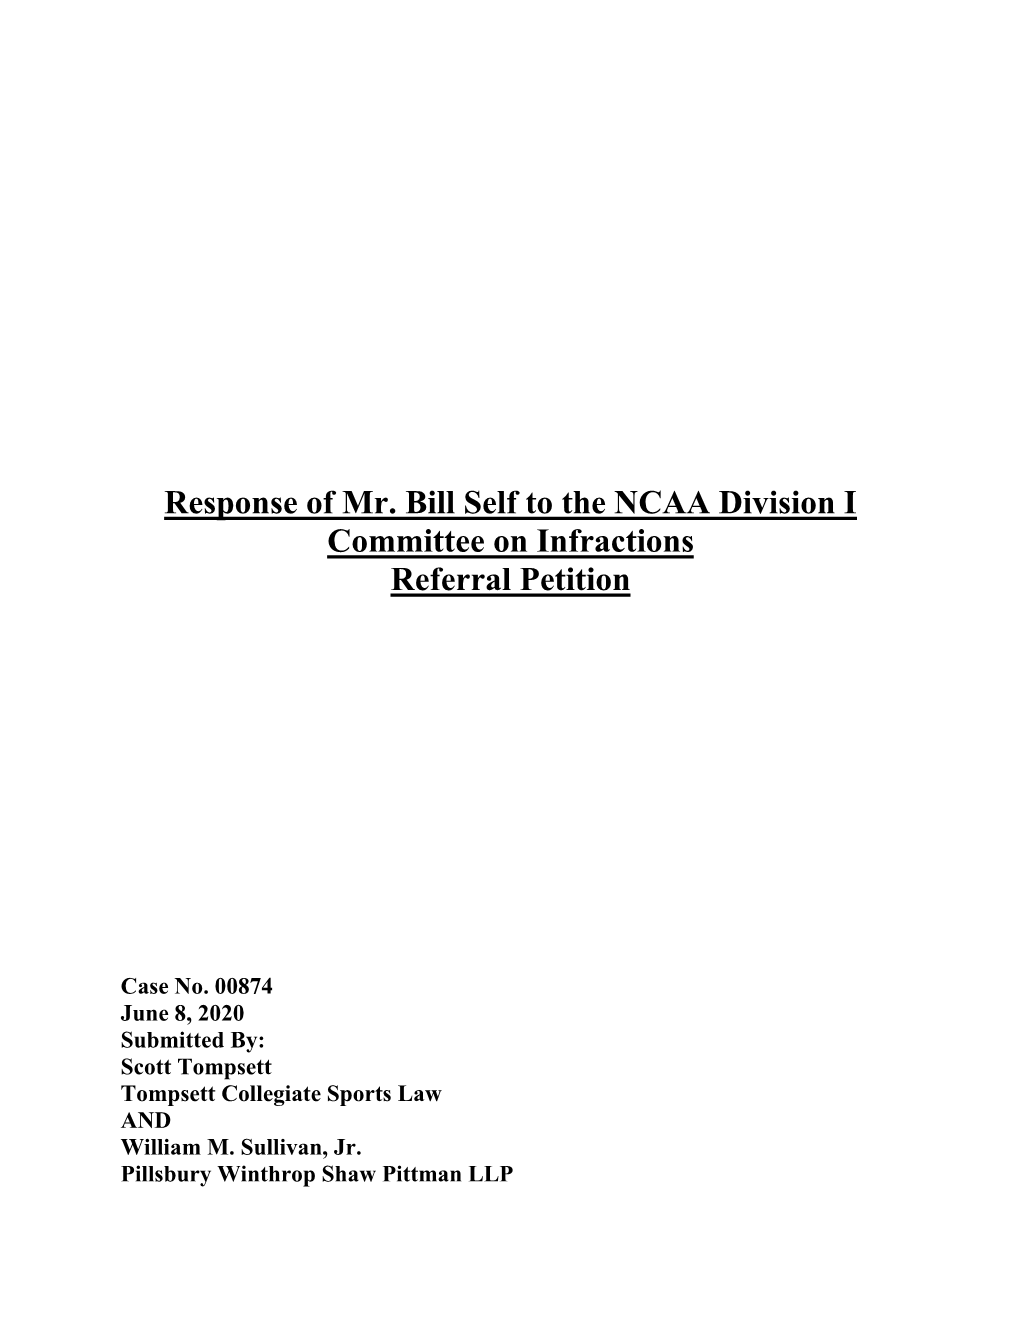 Response of Mr. Bill Self to the NCAA Division I Committee on Infractions Referral Petition